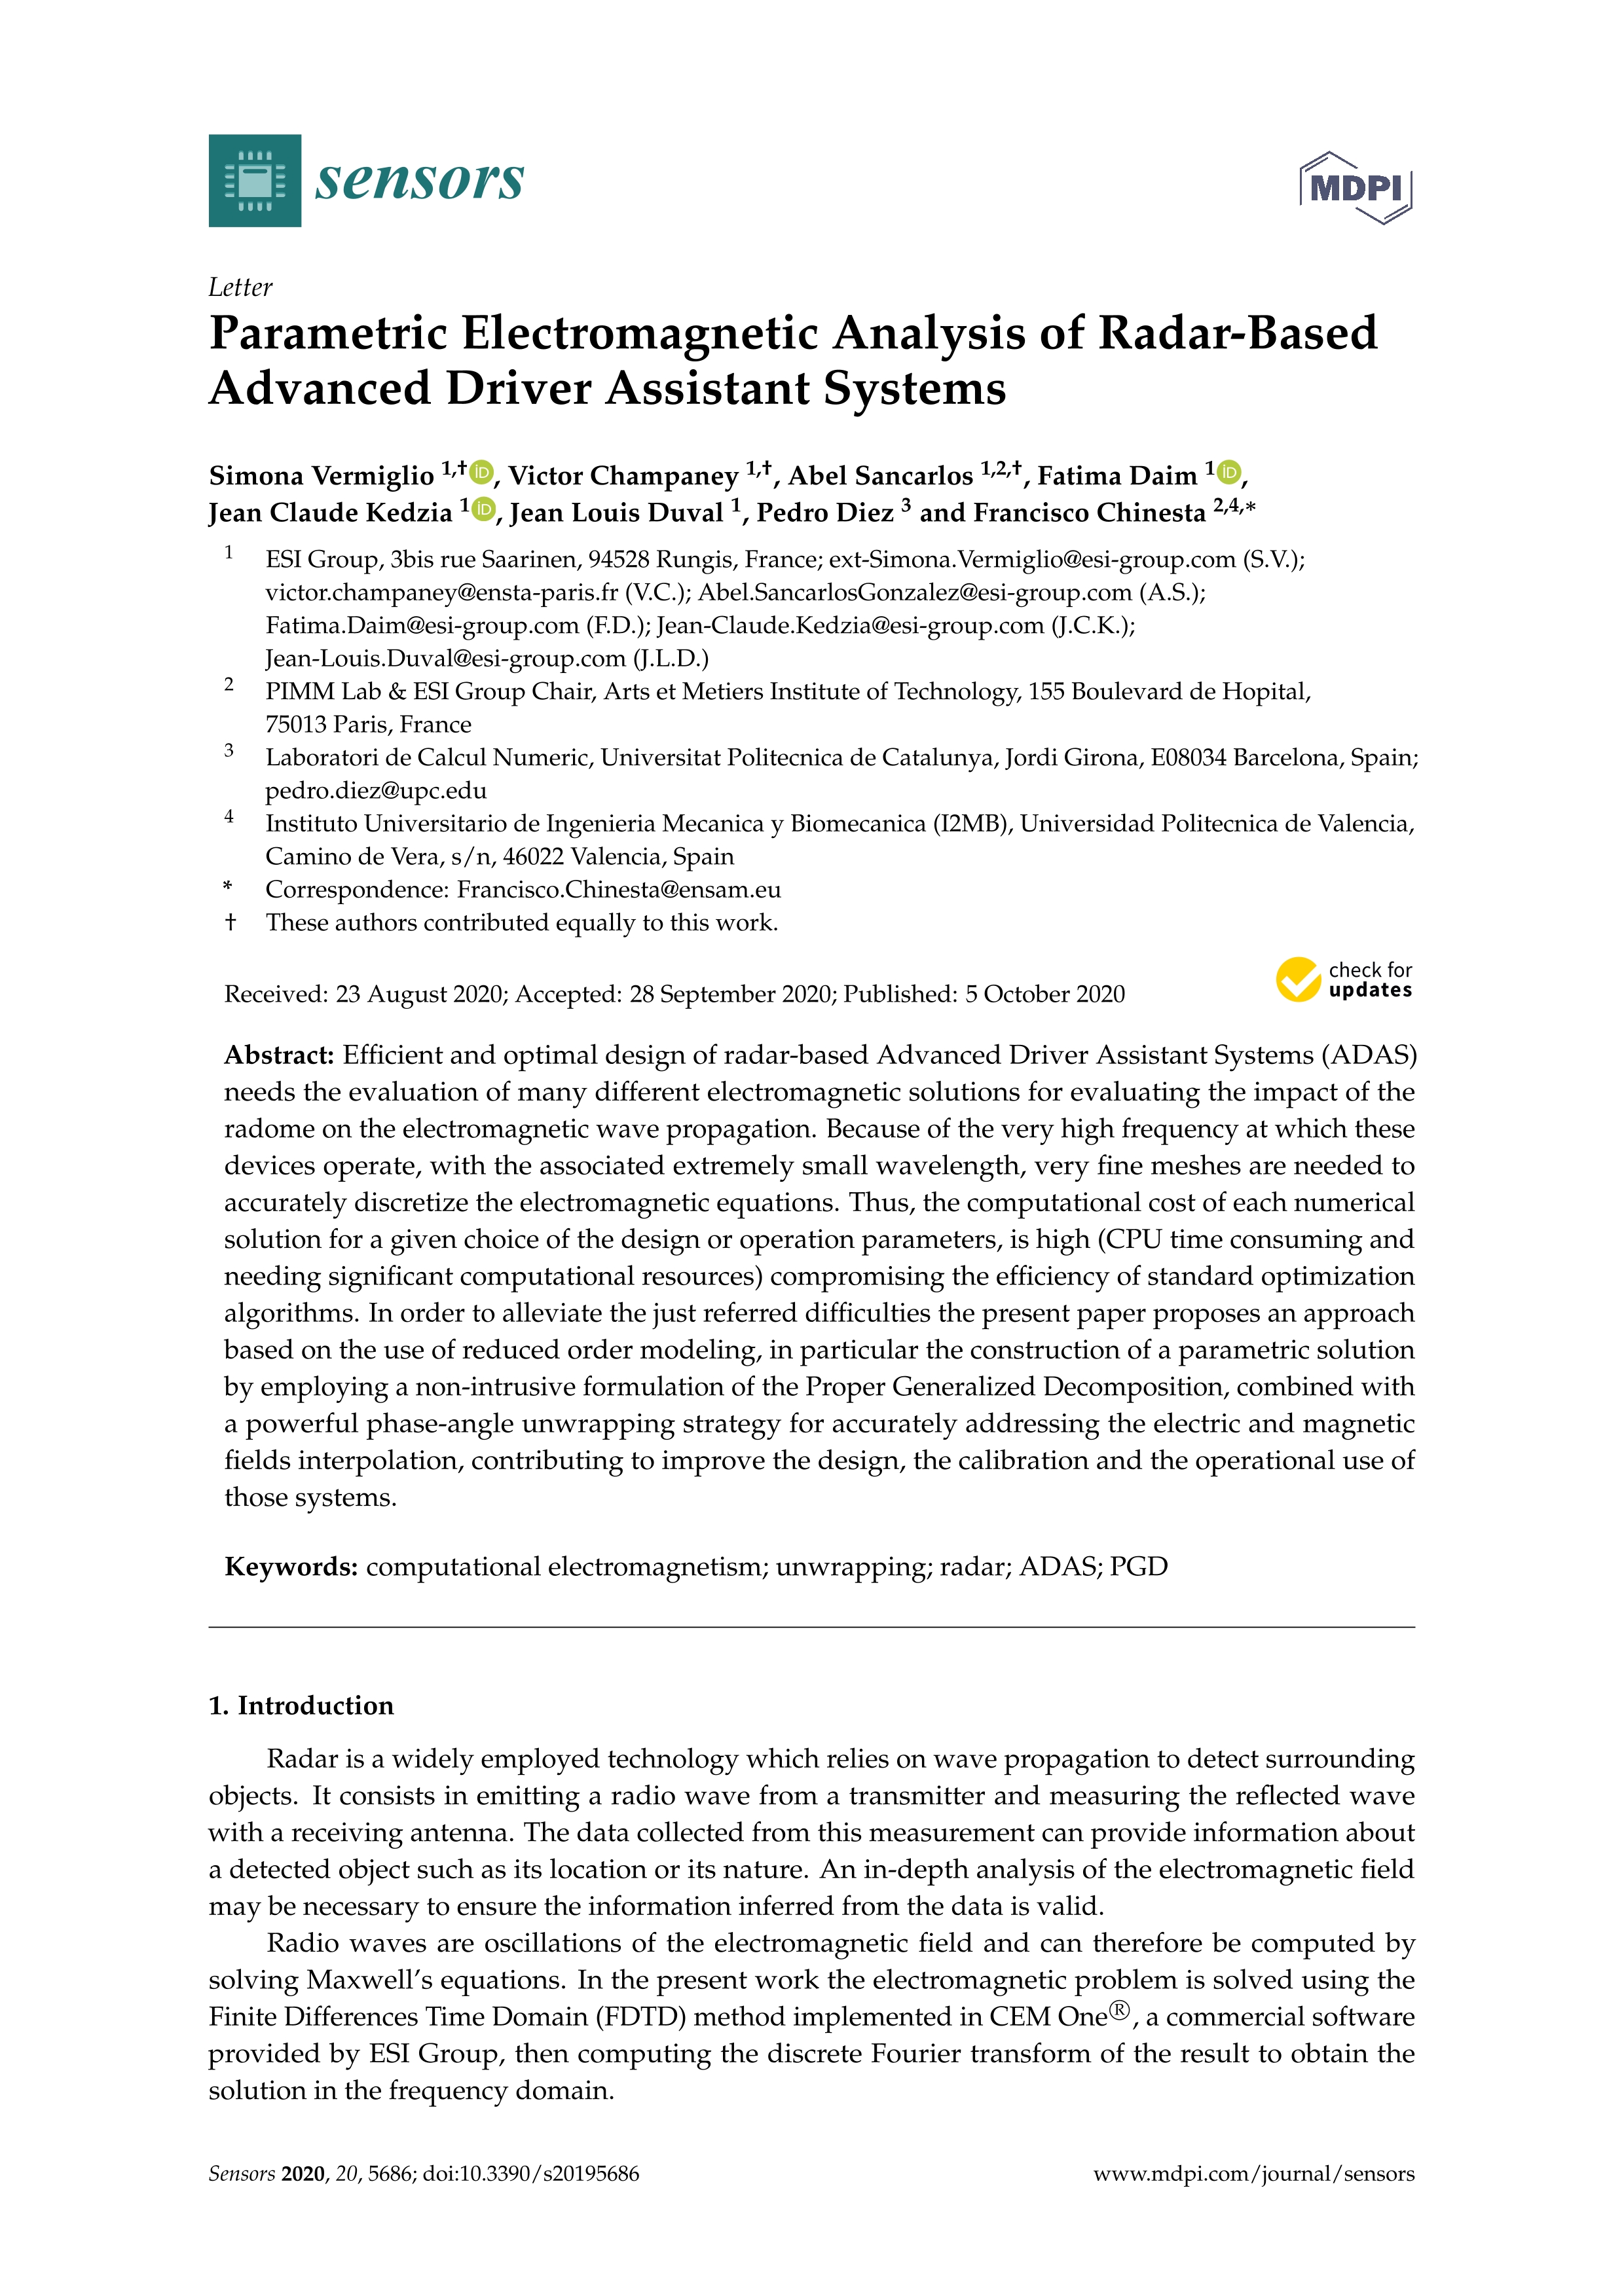 Parametric electromagnetic analysis of radar-based advanced driver assistant systems